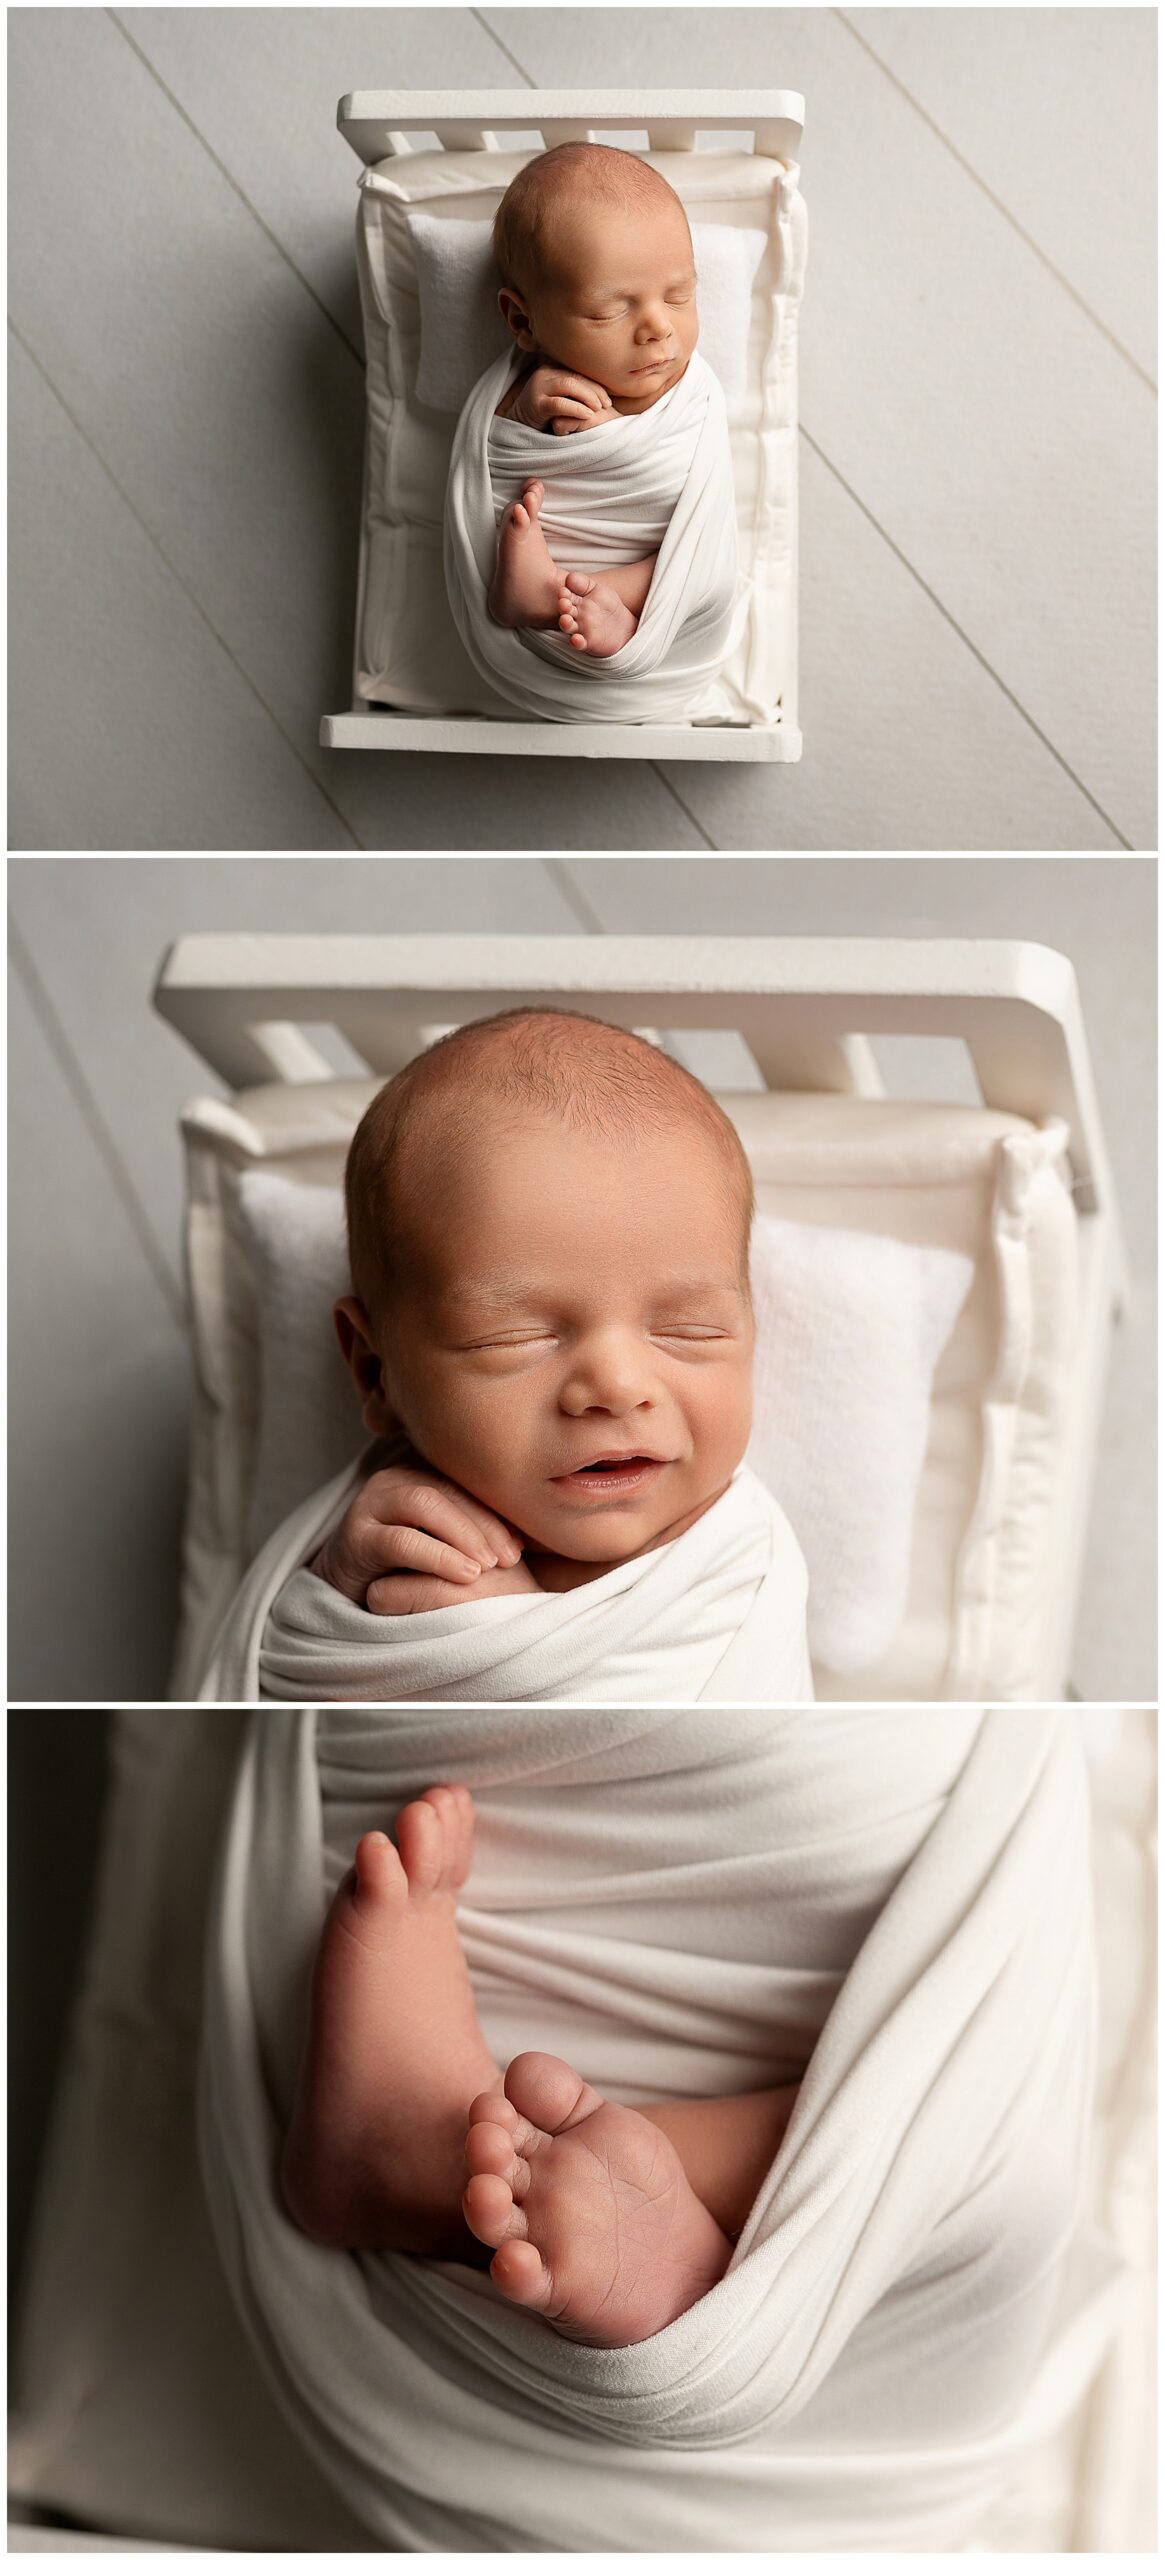 Three pictures of newborns. Top is a full shot of a swaddled newborn, middle is newborn's face and hands, bottom is just newborn's feet. 